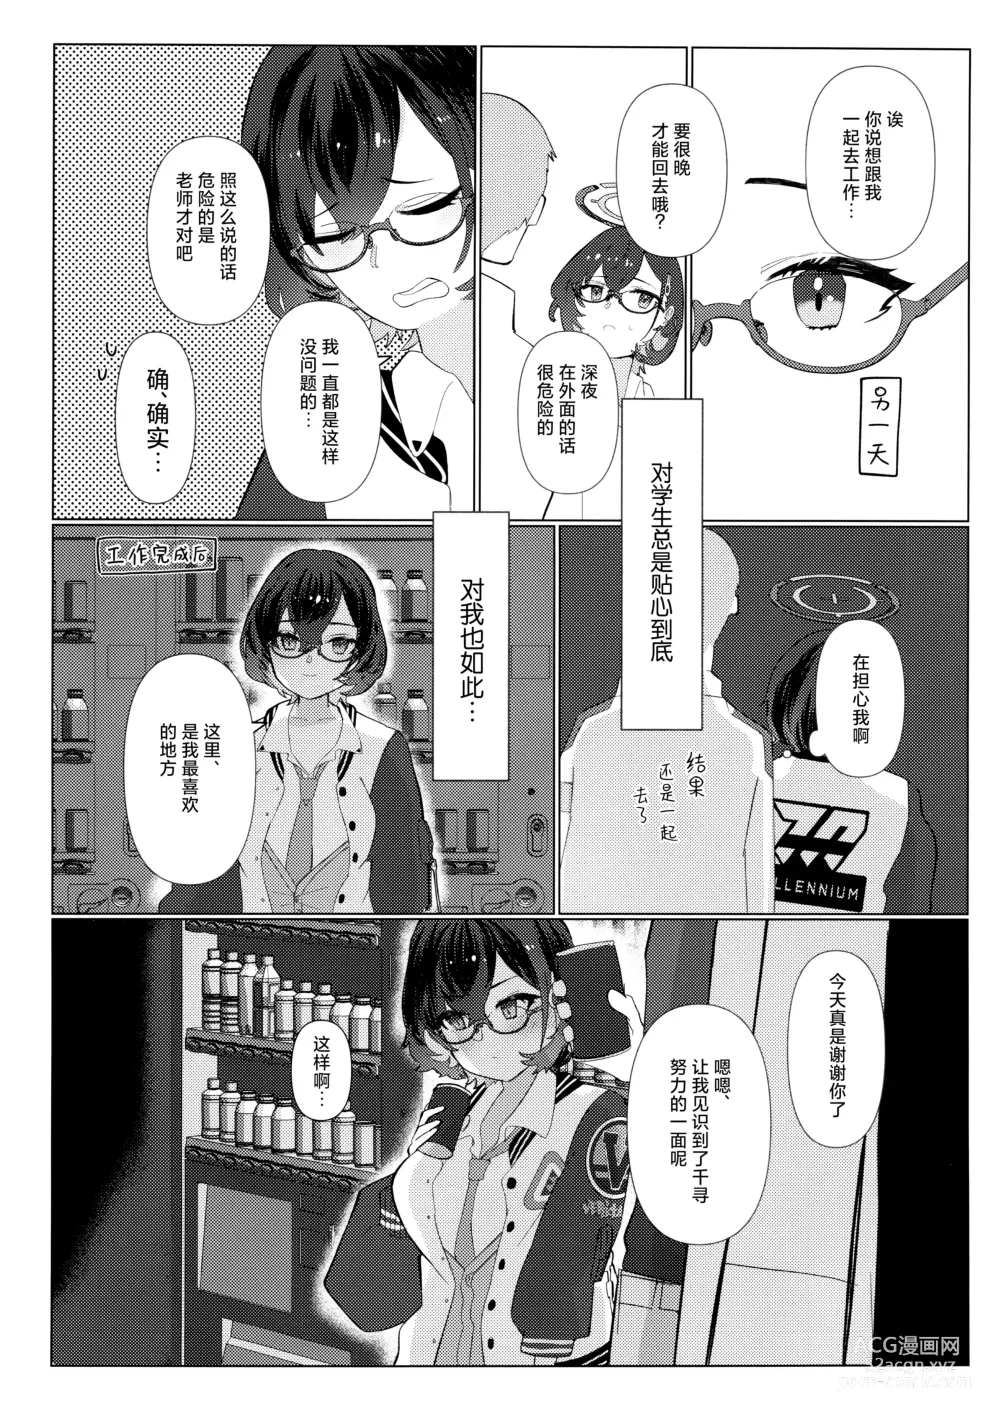 Page 6 of doujinshi 第一次的教学